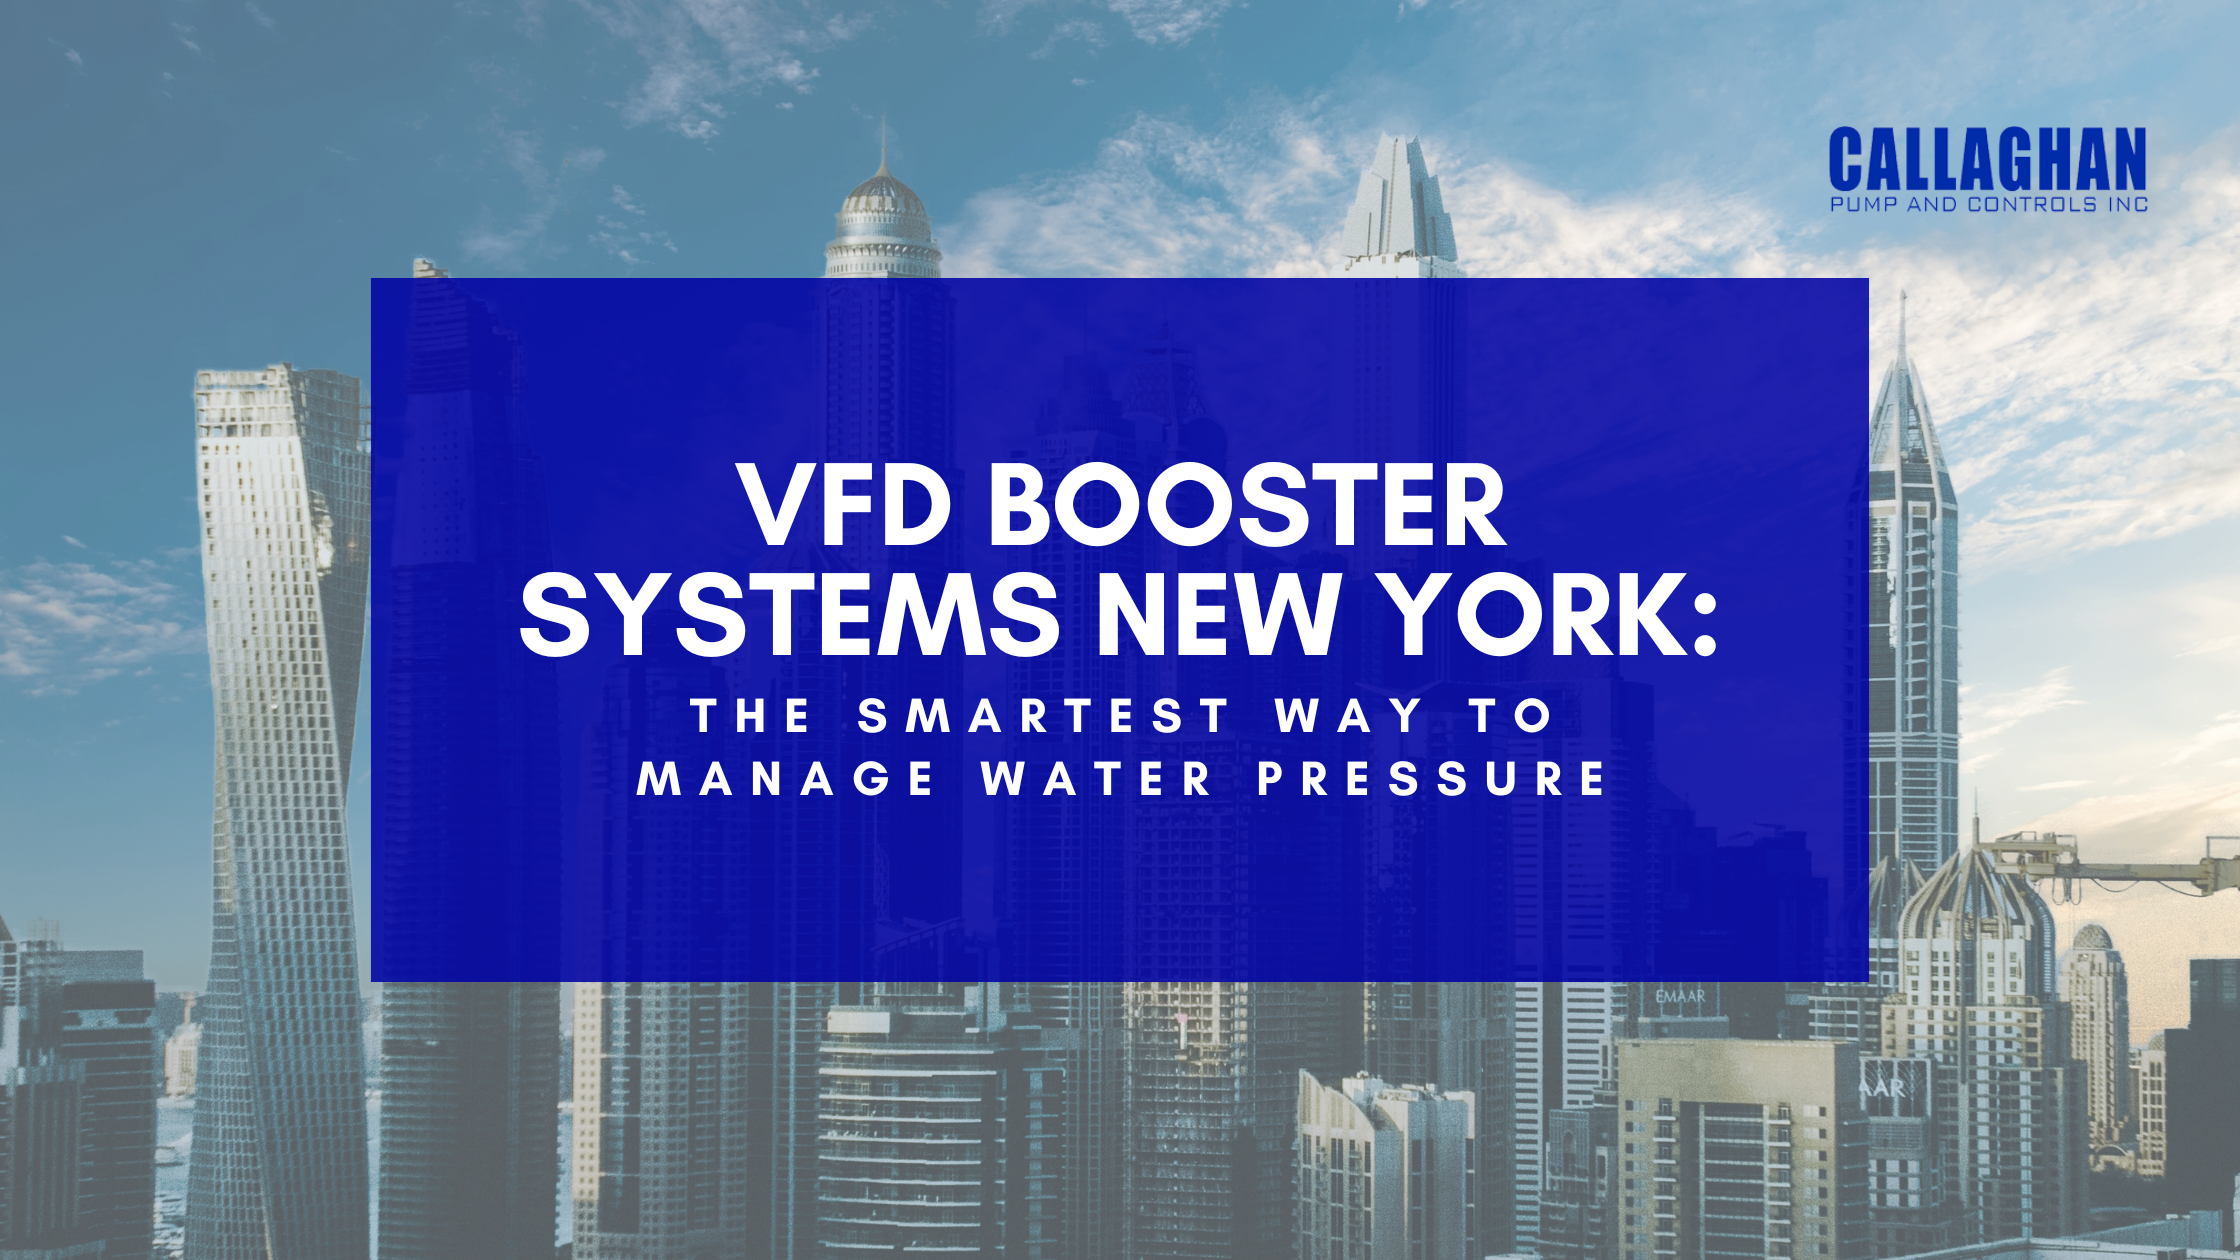 VFD Booster Systems New York